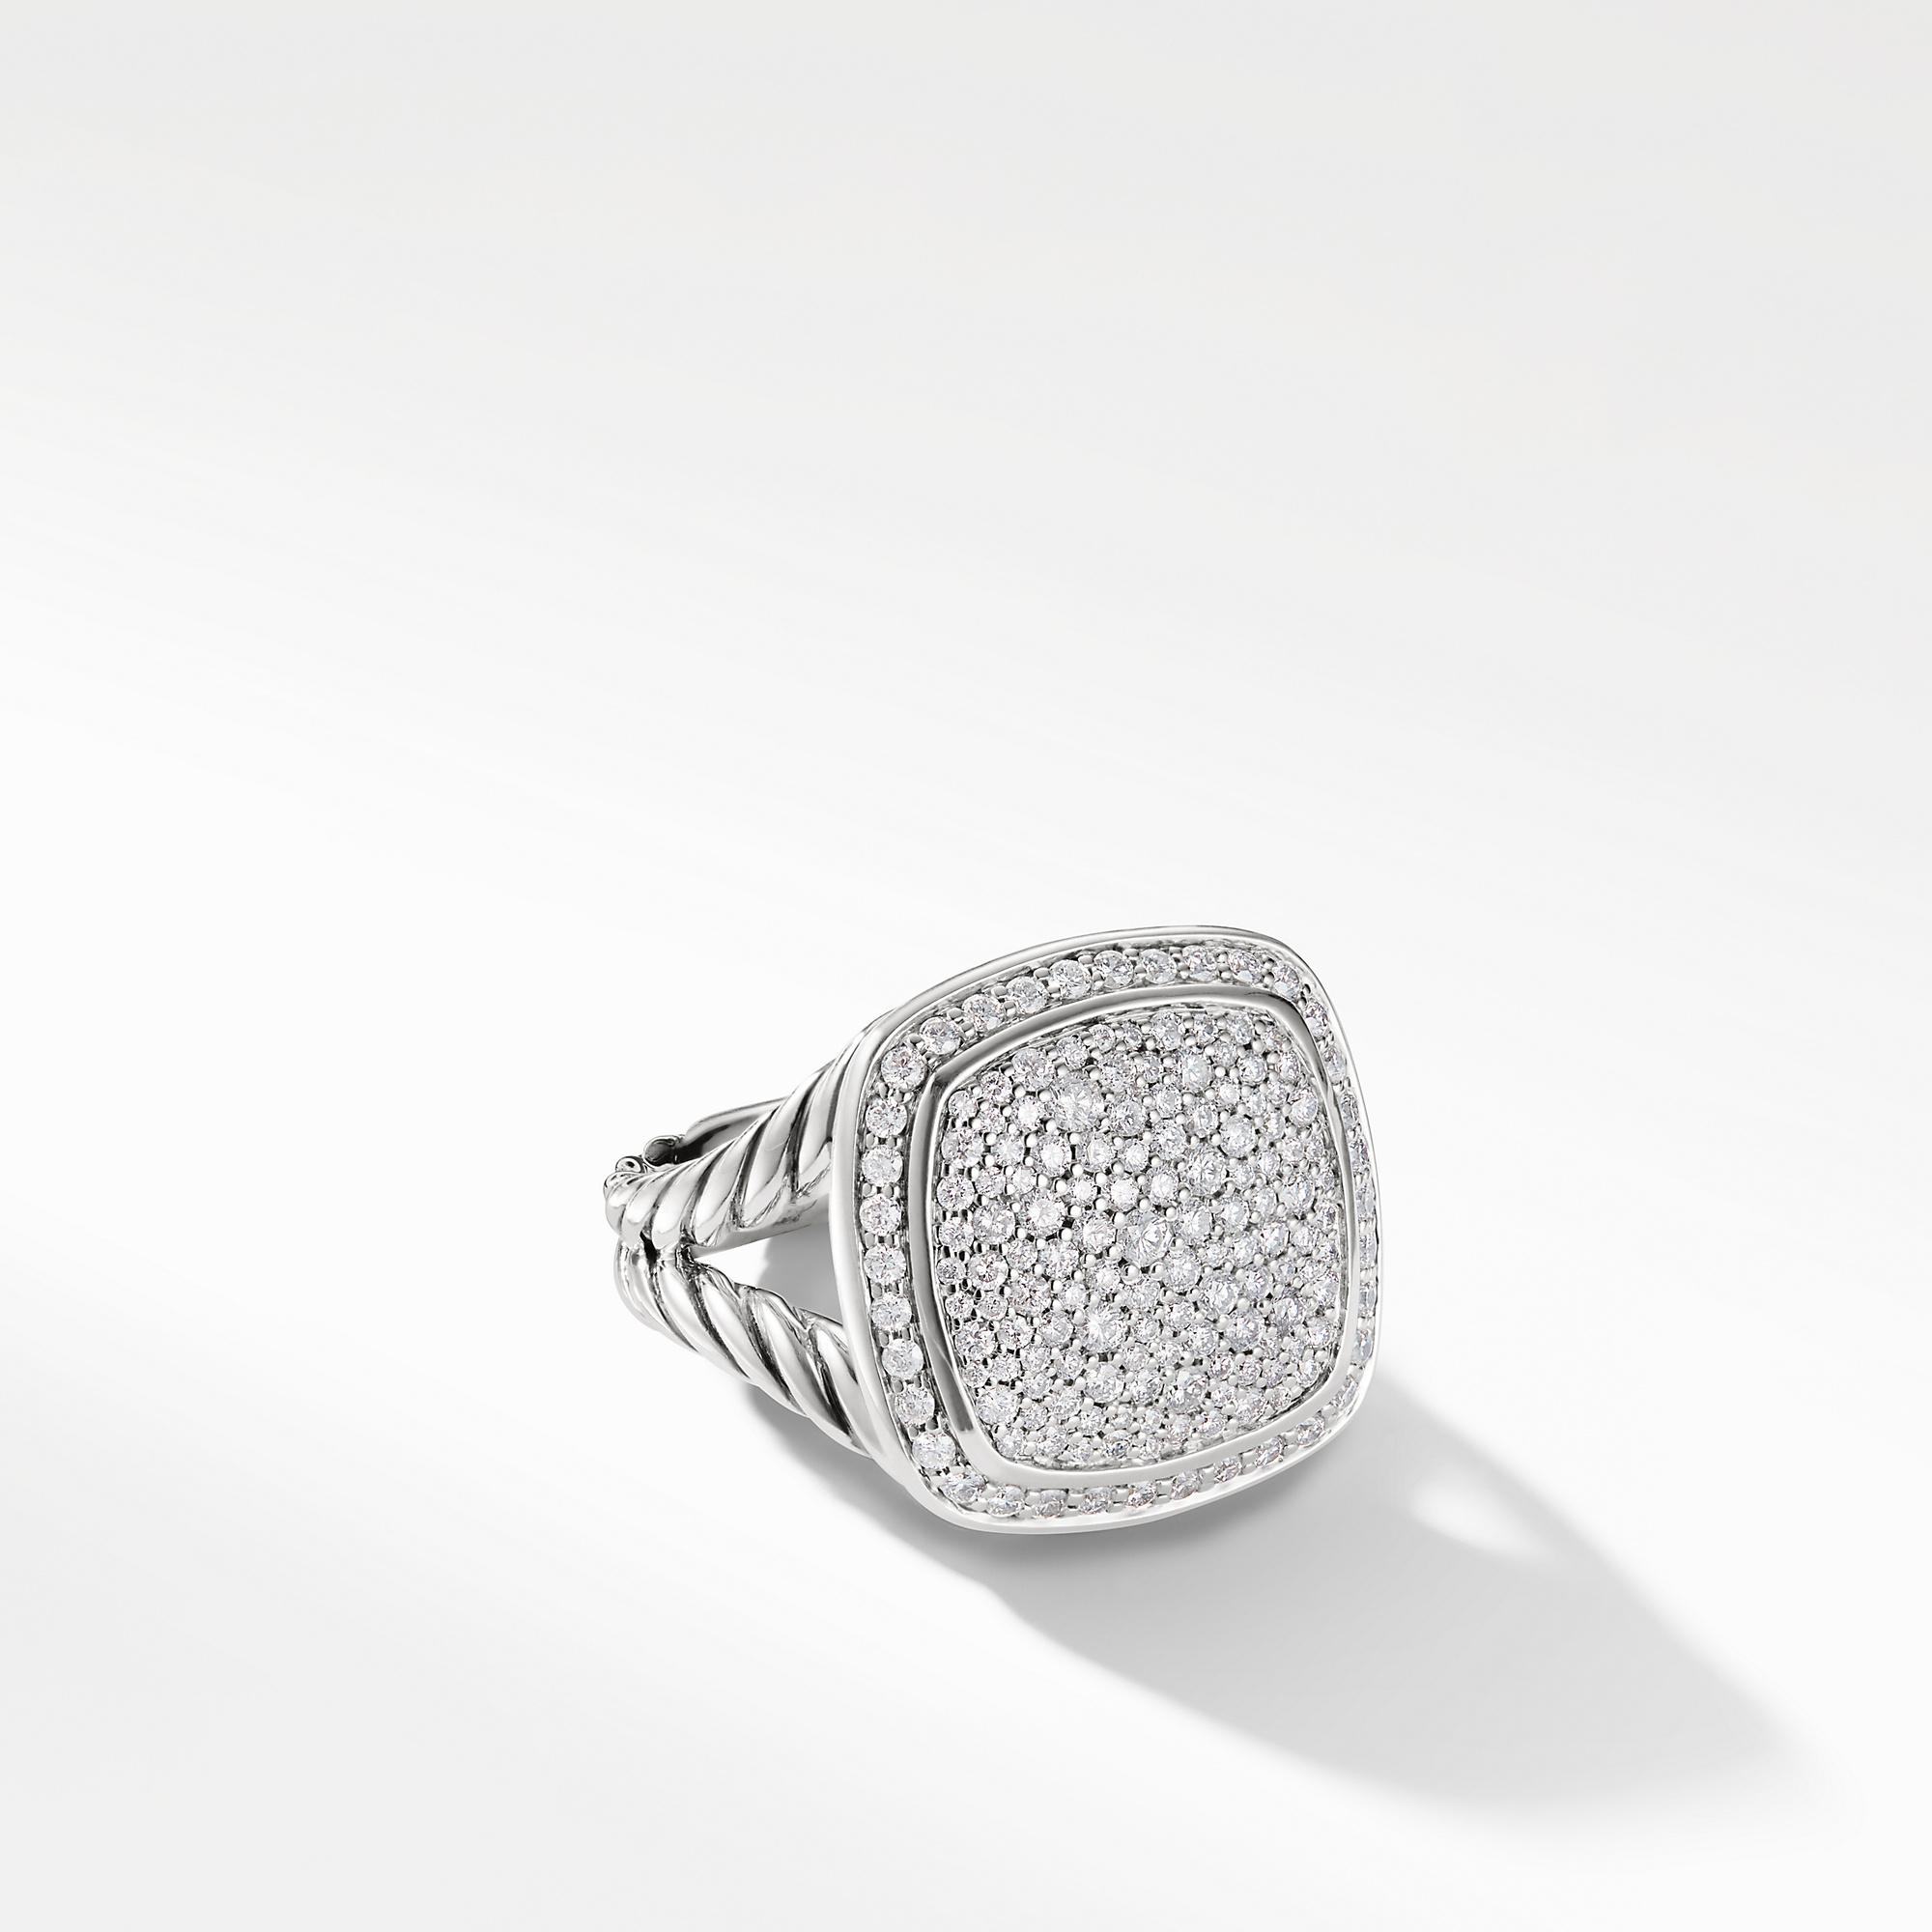 David Yurman 14mm Albion Ring in Sterling Silver with Pave Diamonds, size 6